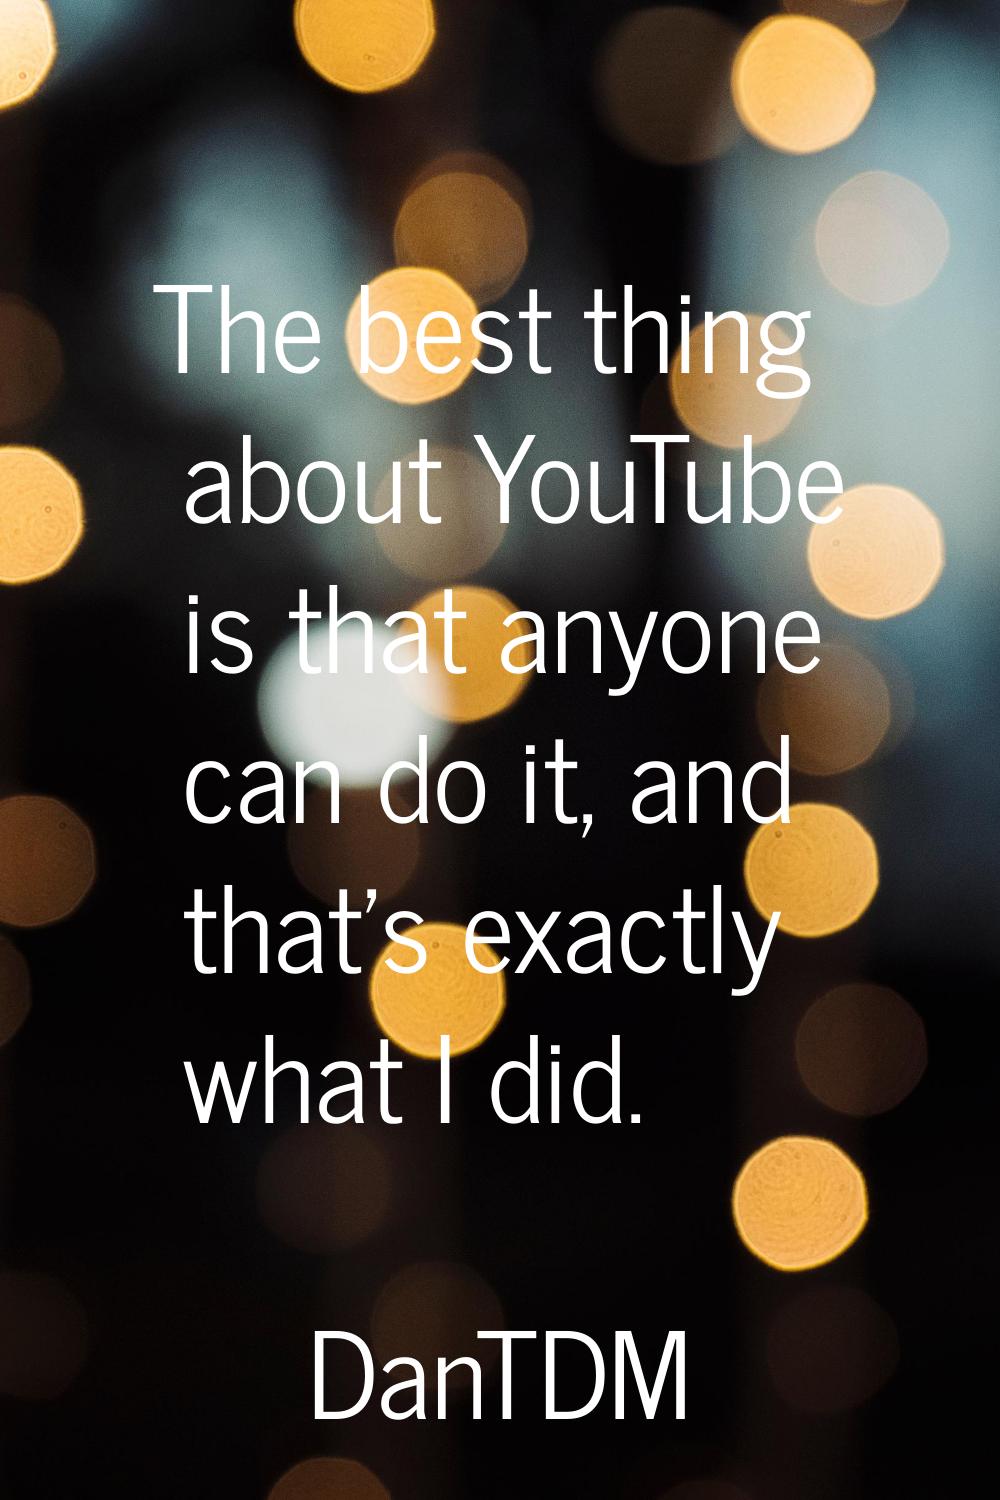 The best thing about YouTube is that anyone can do it, and that's exactly what I did.